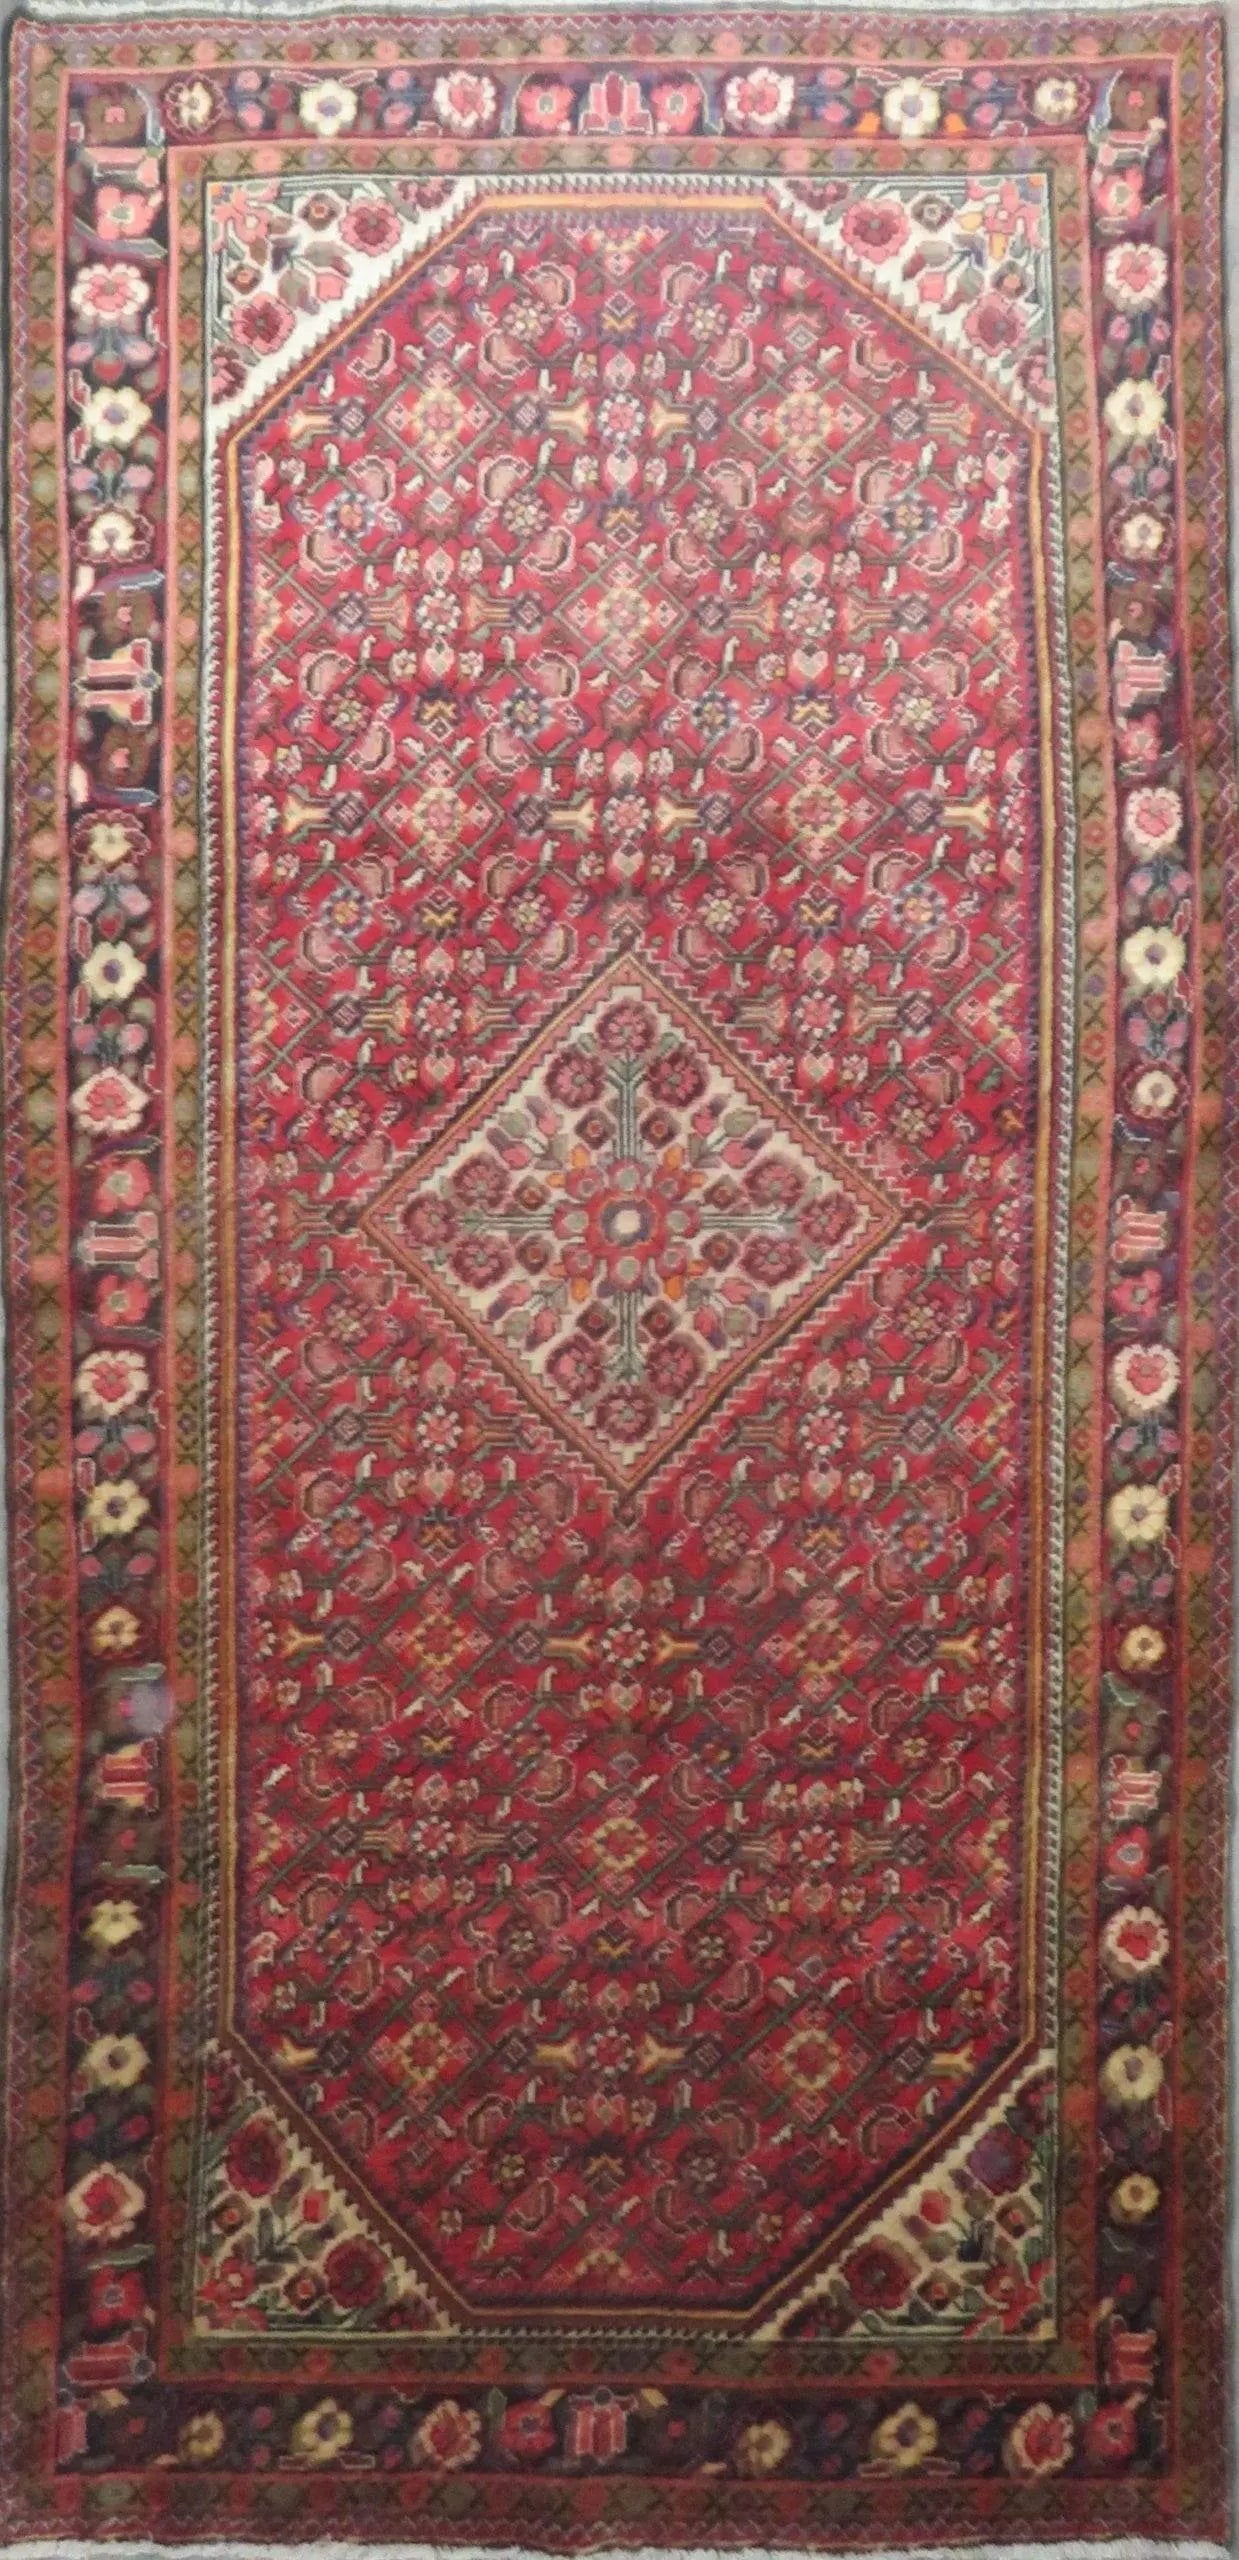 Hand-Knotted Persian Wool Rug _ Luxurious Vintage Design, 10'5" x 5'2", Artisan Crafted